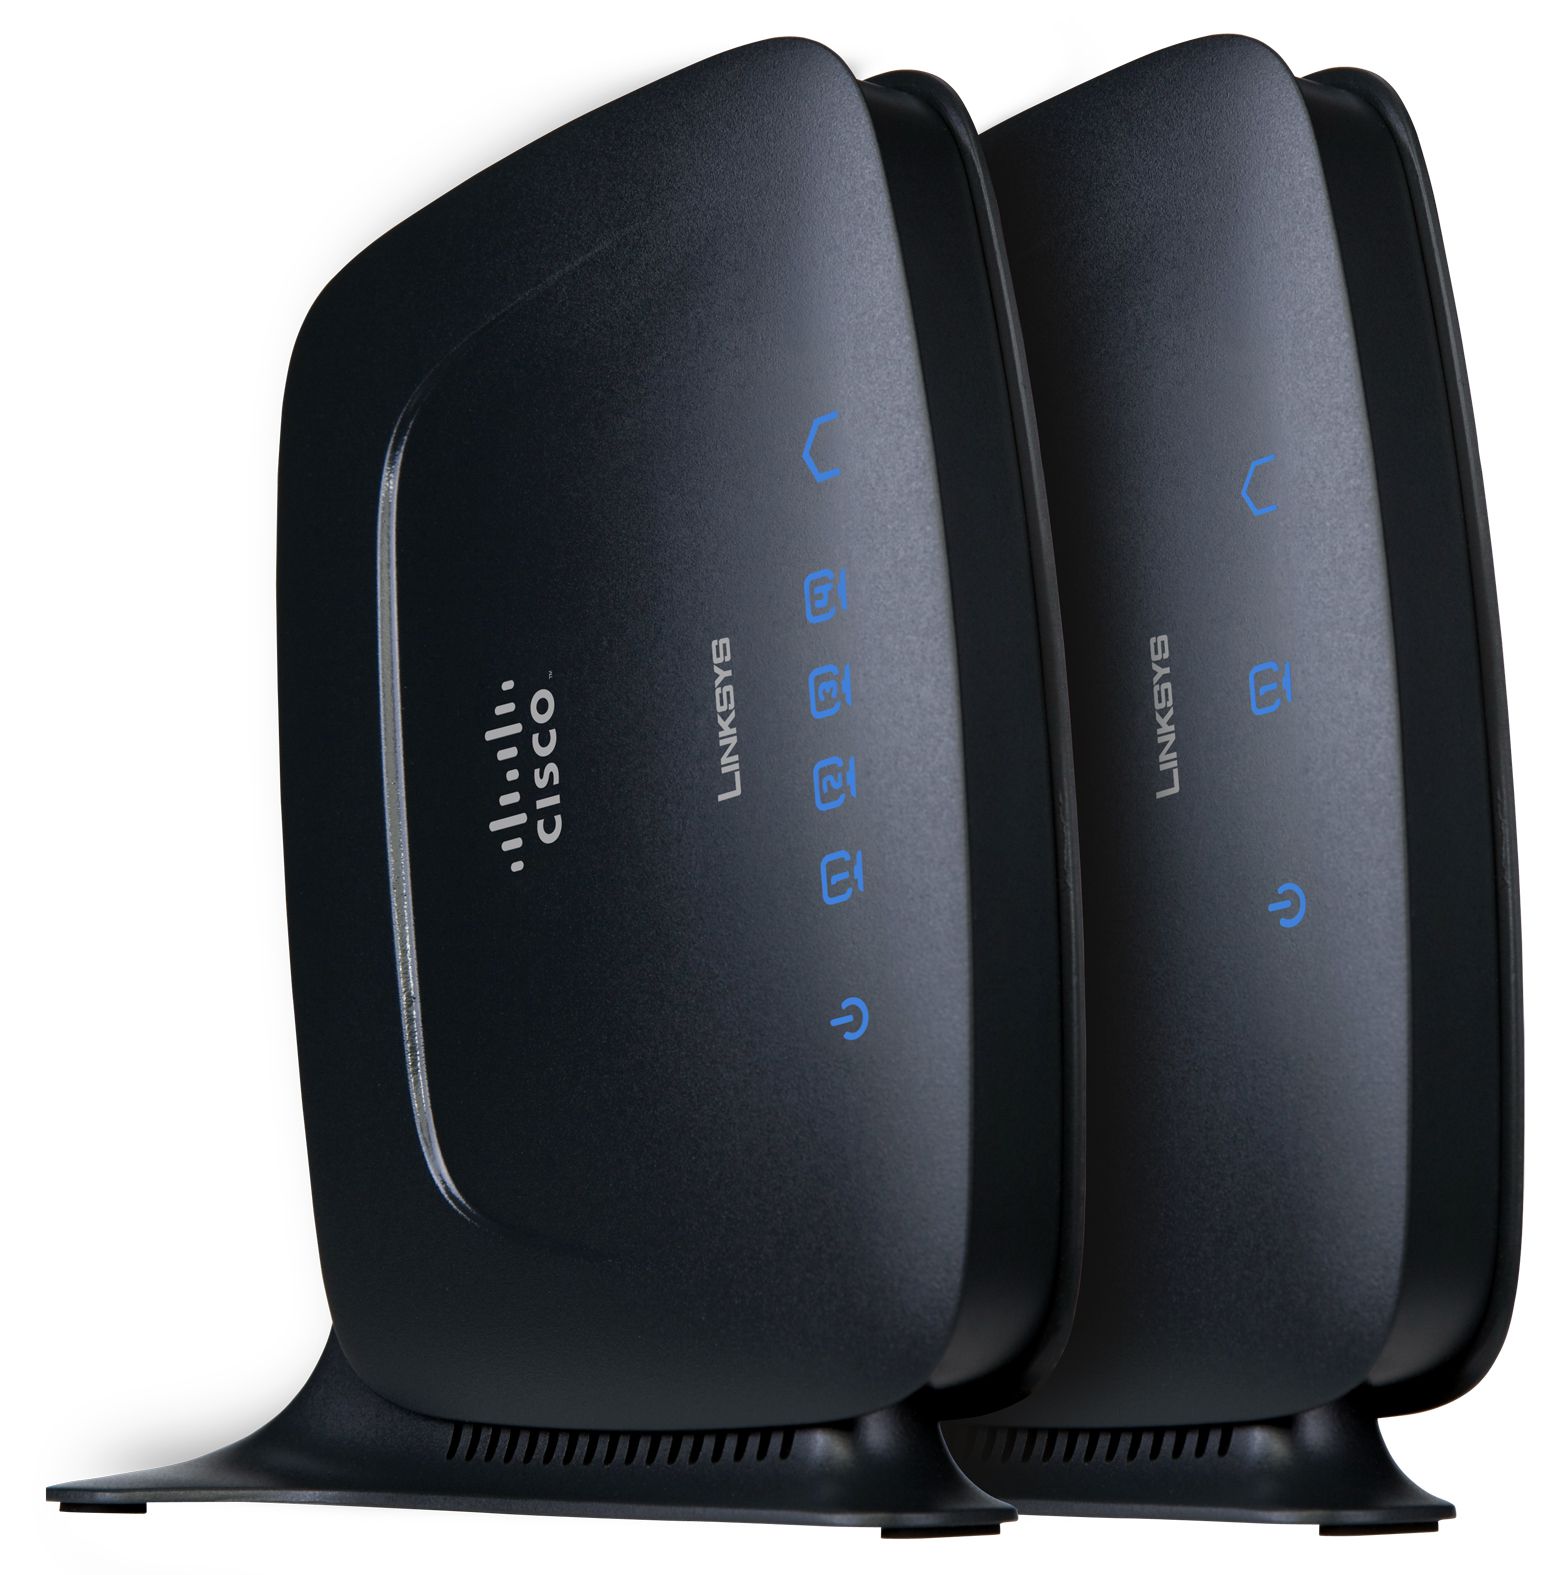 Linksys easylink connect download